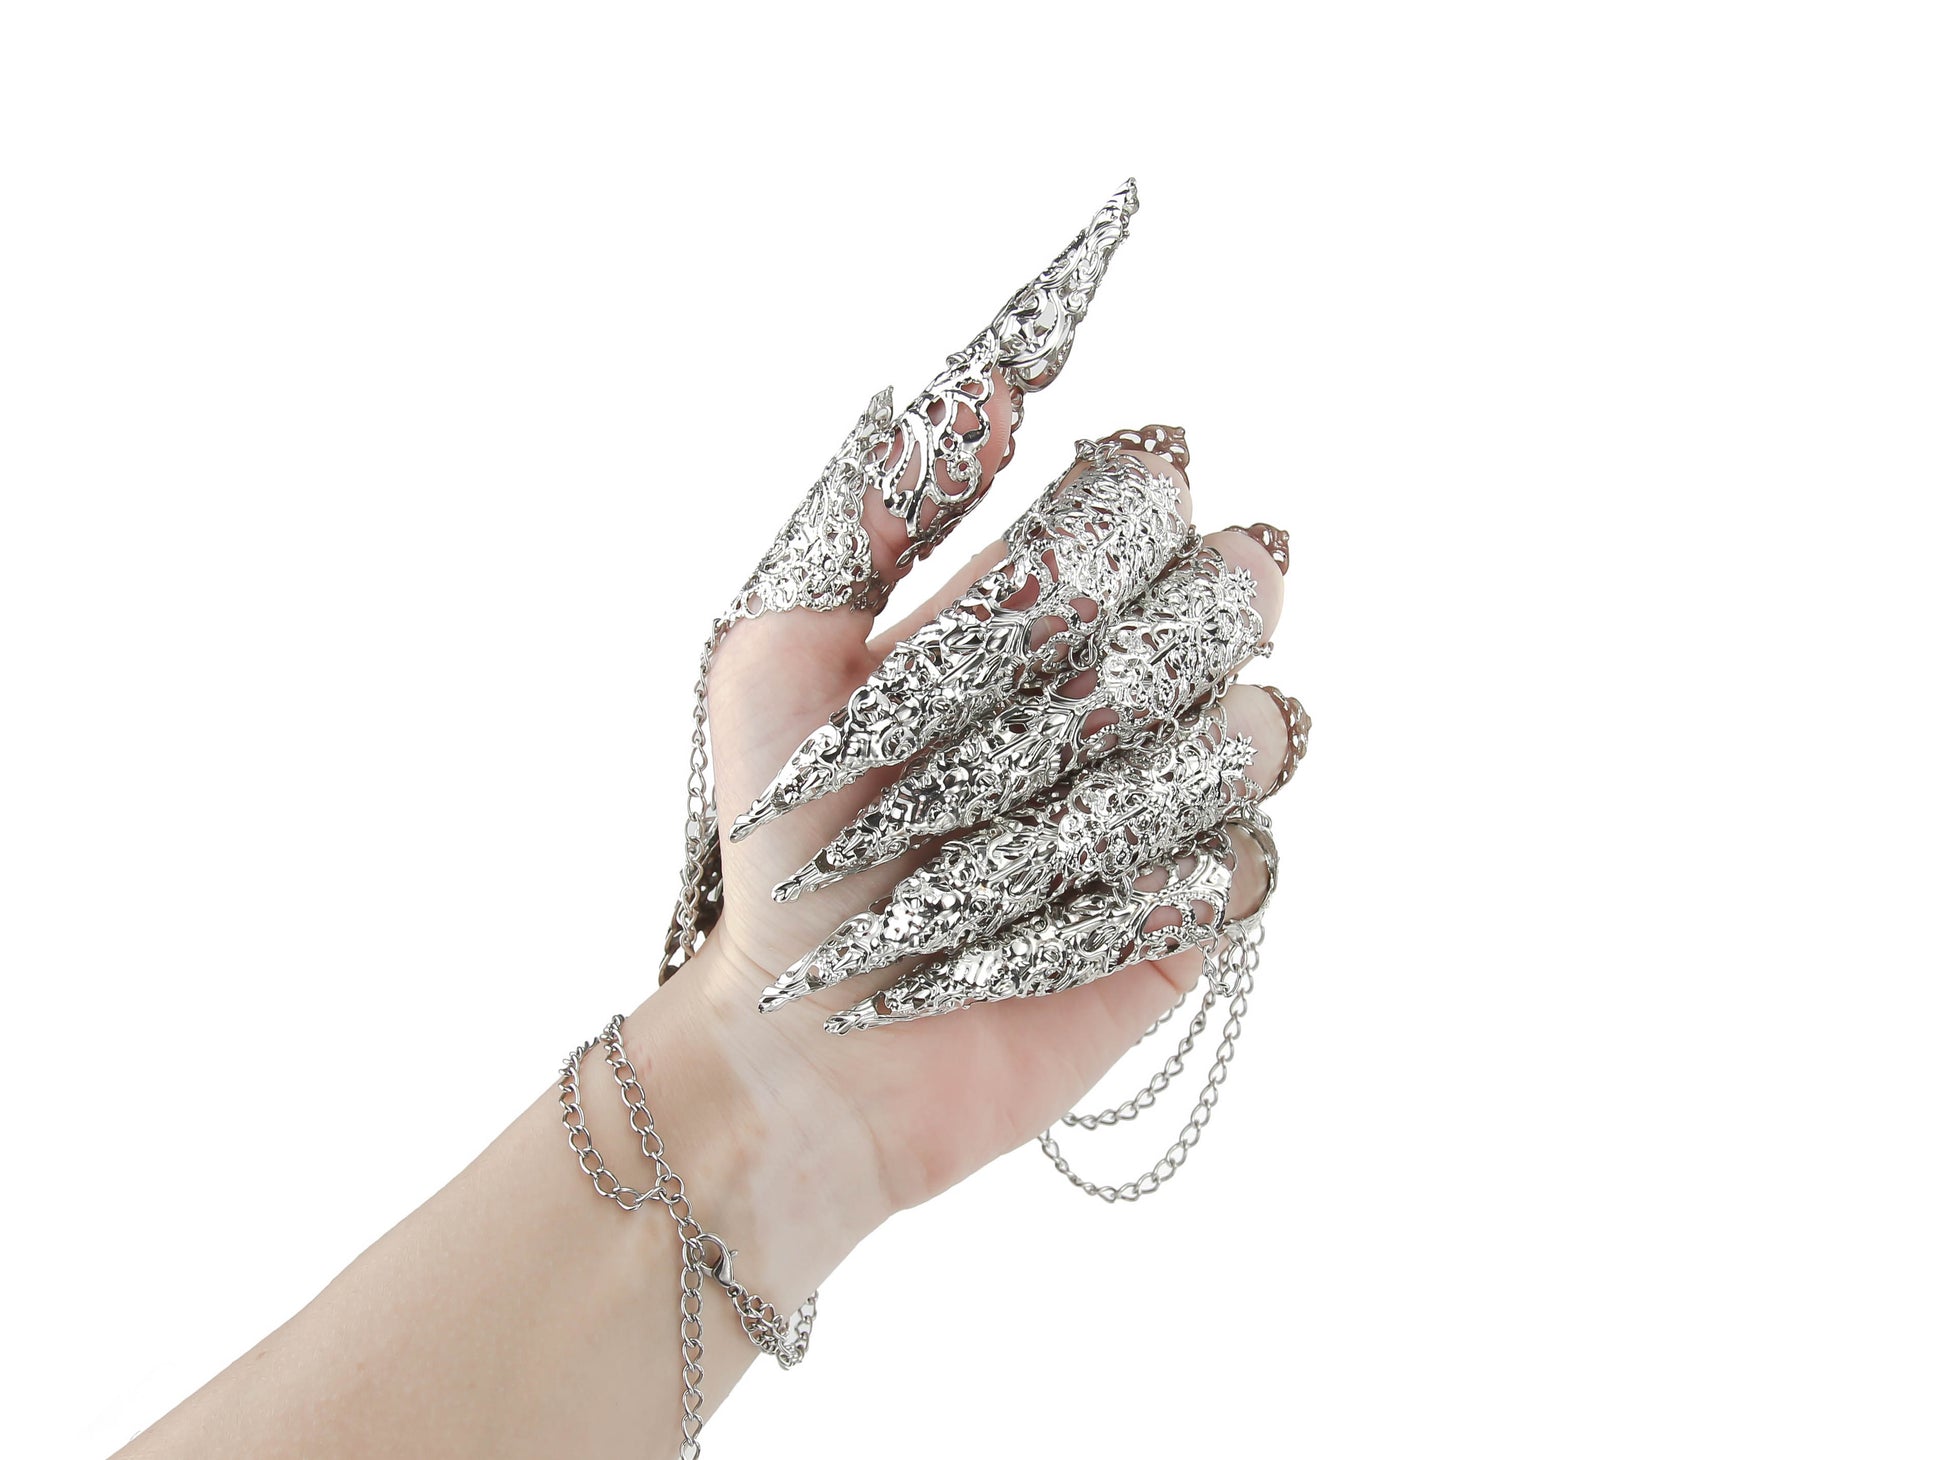 The rear of an almost closed hand over a white background is showcasing Myril Jewels' silver lace finger armor, intertwined with chains, epitomizing dark-avantgarde jewelry. This bold, witchcore accessory is a gothic-chic masterpiece, ideal for Halloween, punk, and neo-gothic fashion statements, crafted with the sophisticated whimsy of Gothic Lolita.